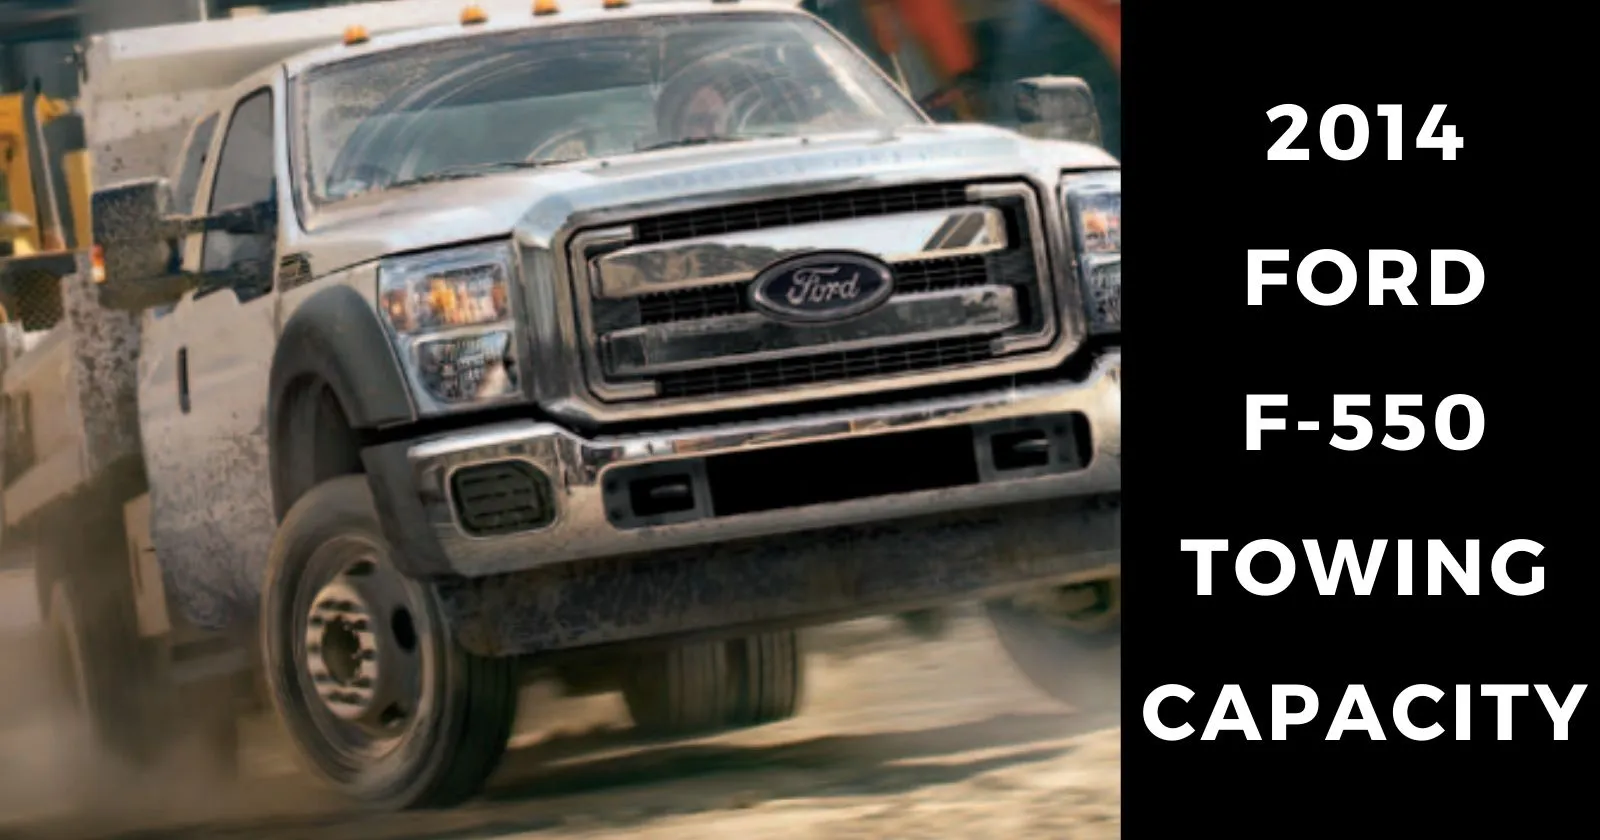 2014-ford-f550-towing-capacity-with-charts-thecartowing